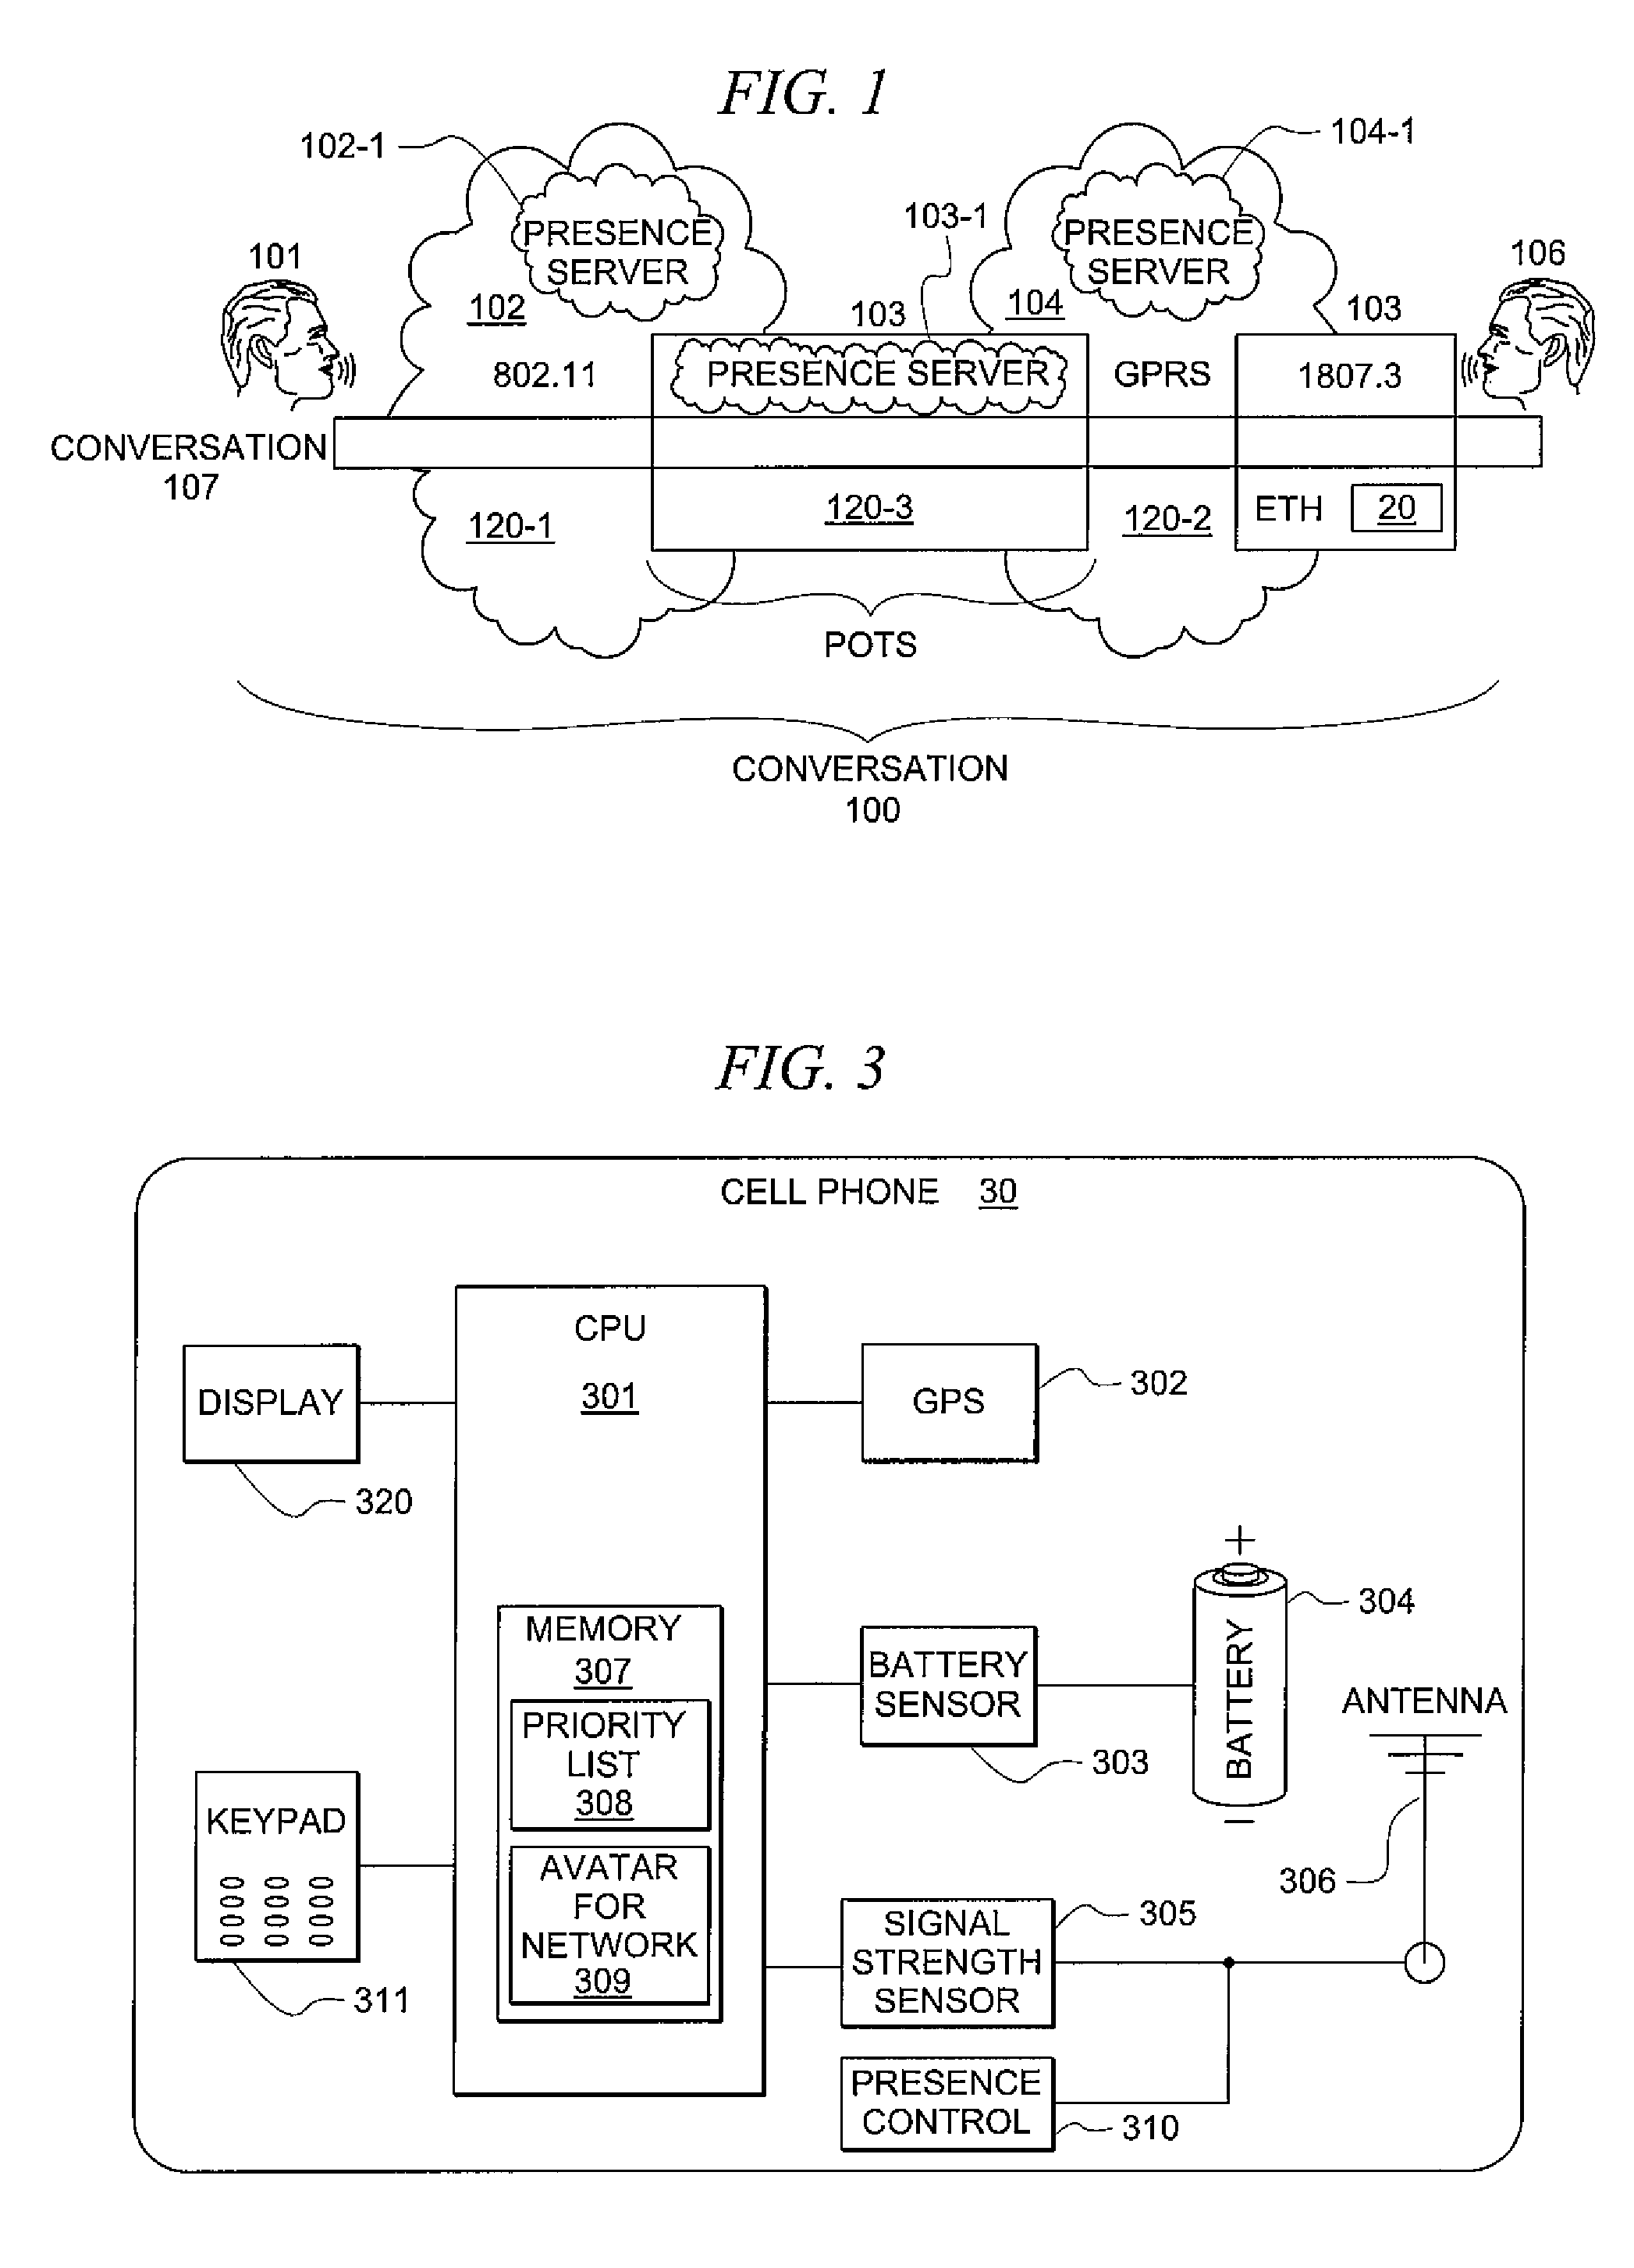 System and method for seamless communication system inter-device transition